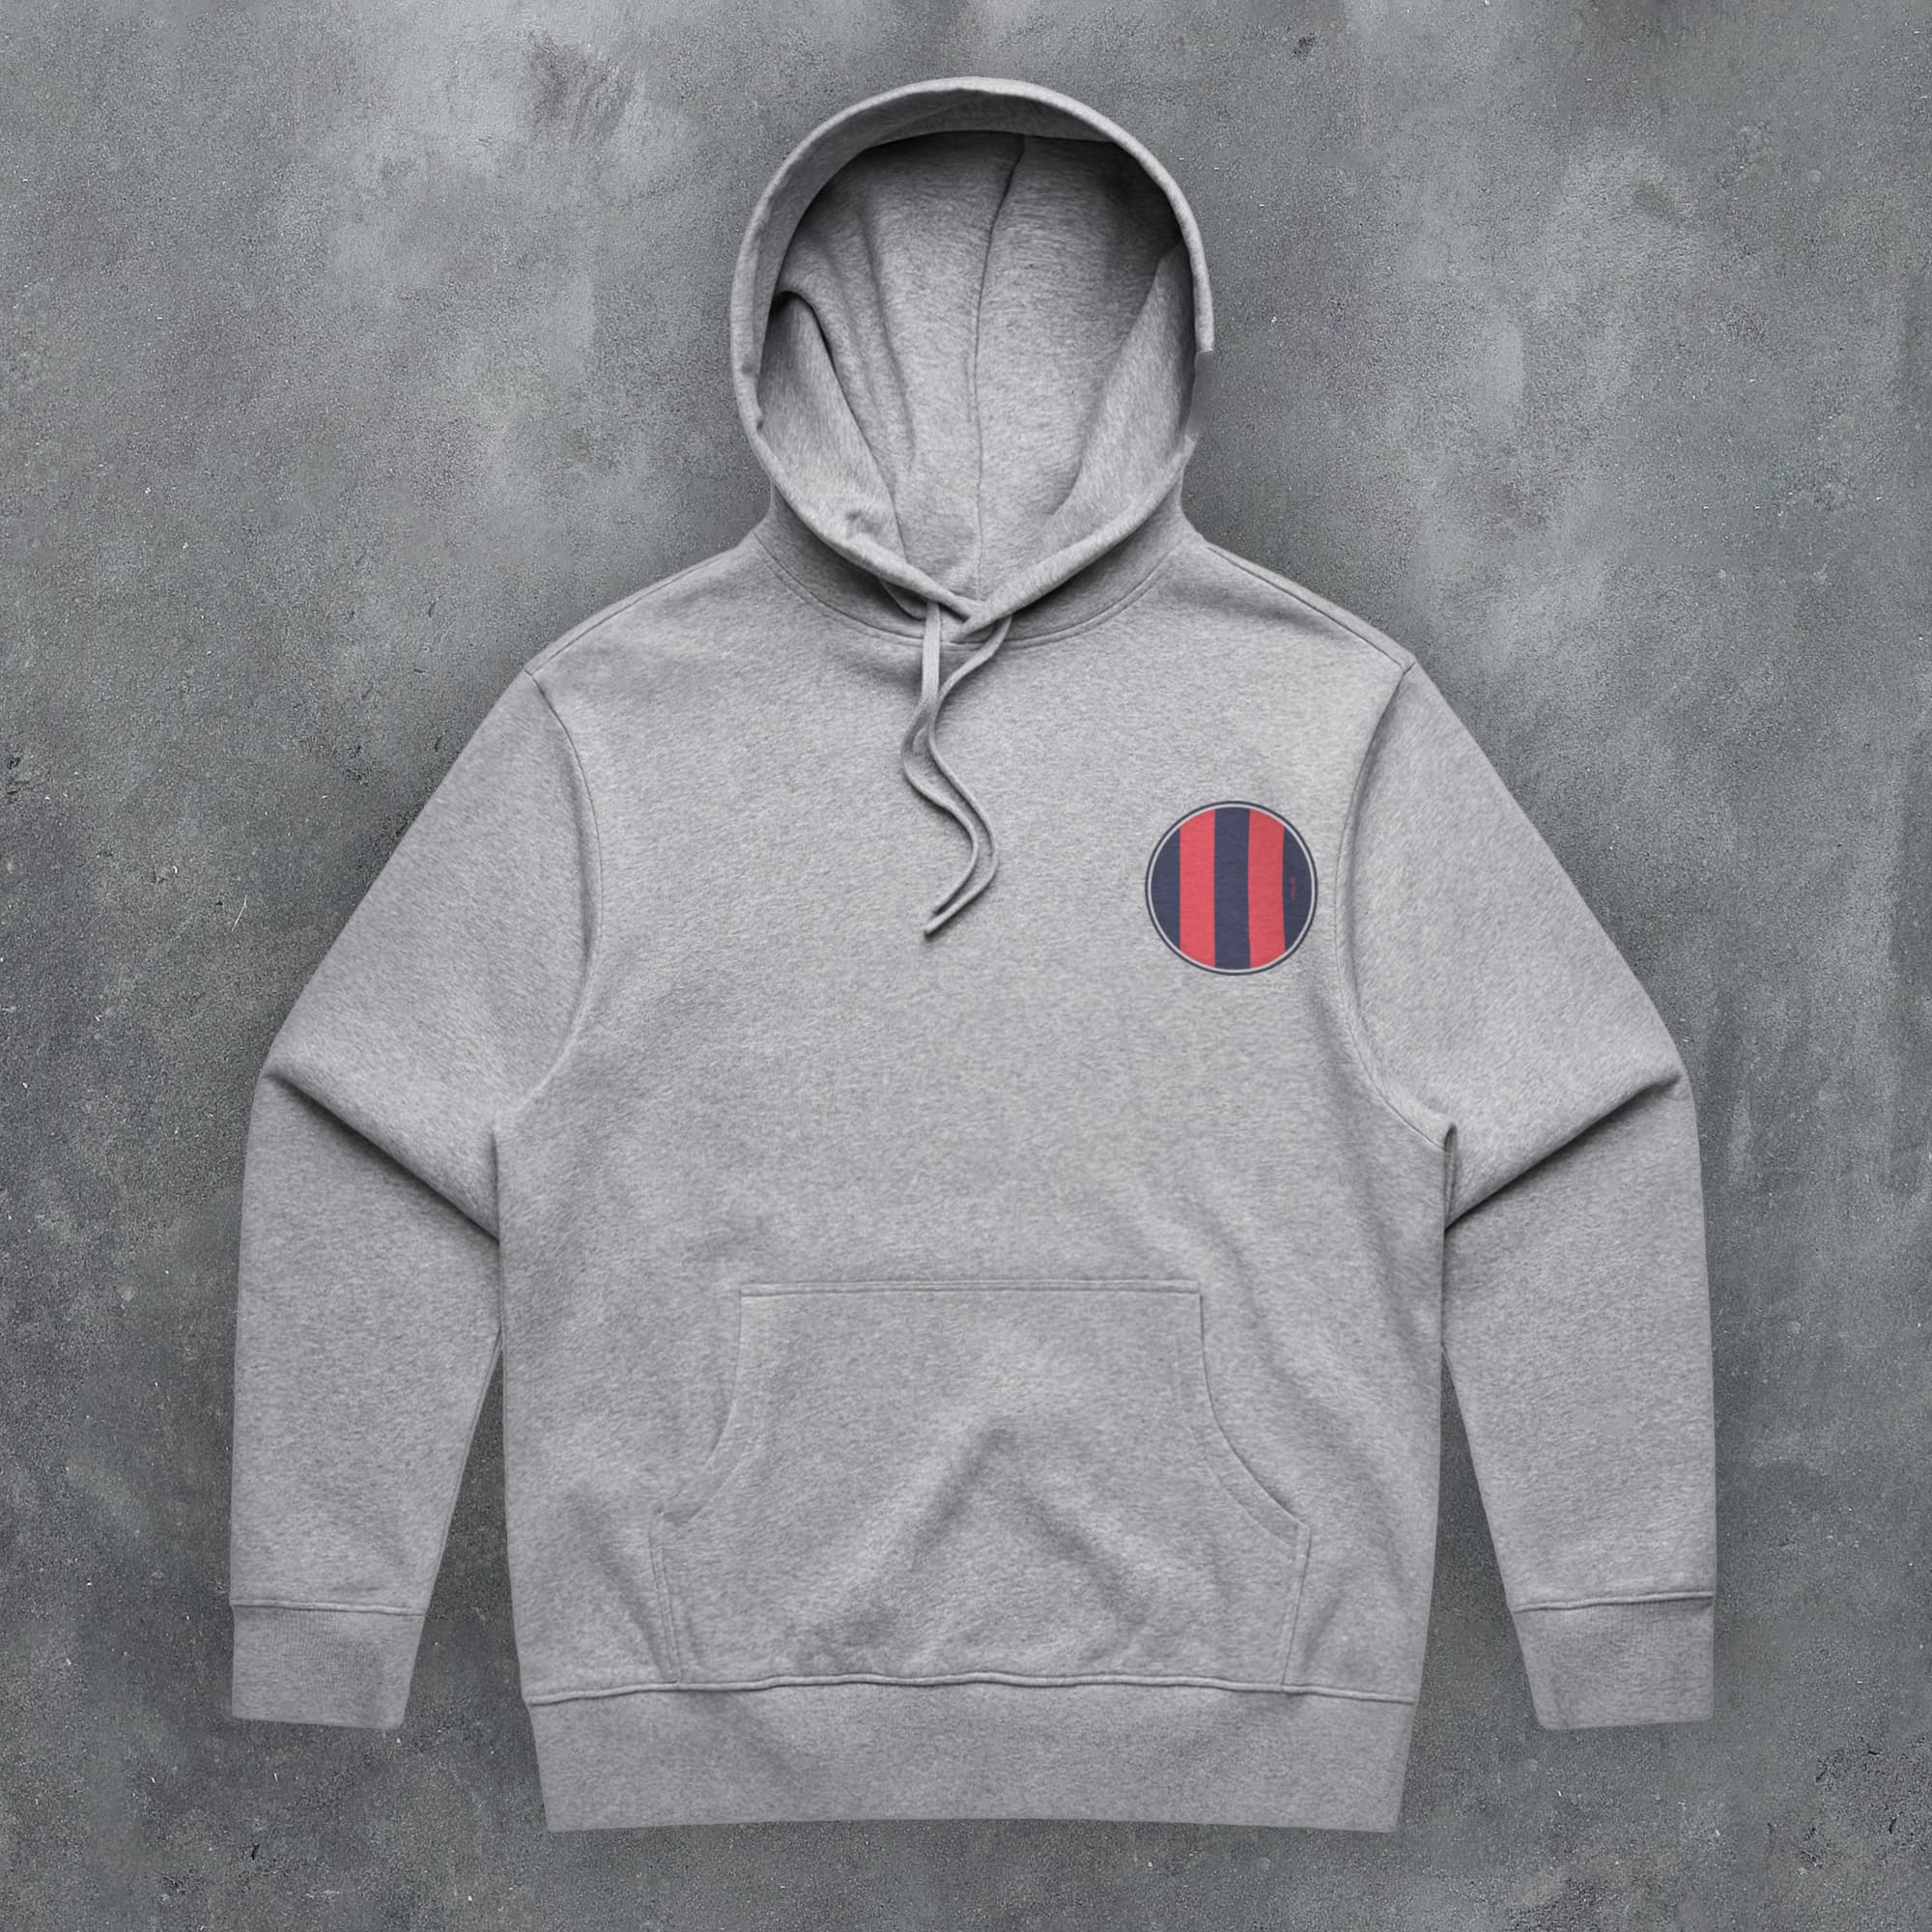 a grey hoodie with a red, white and blue stripe on it